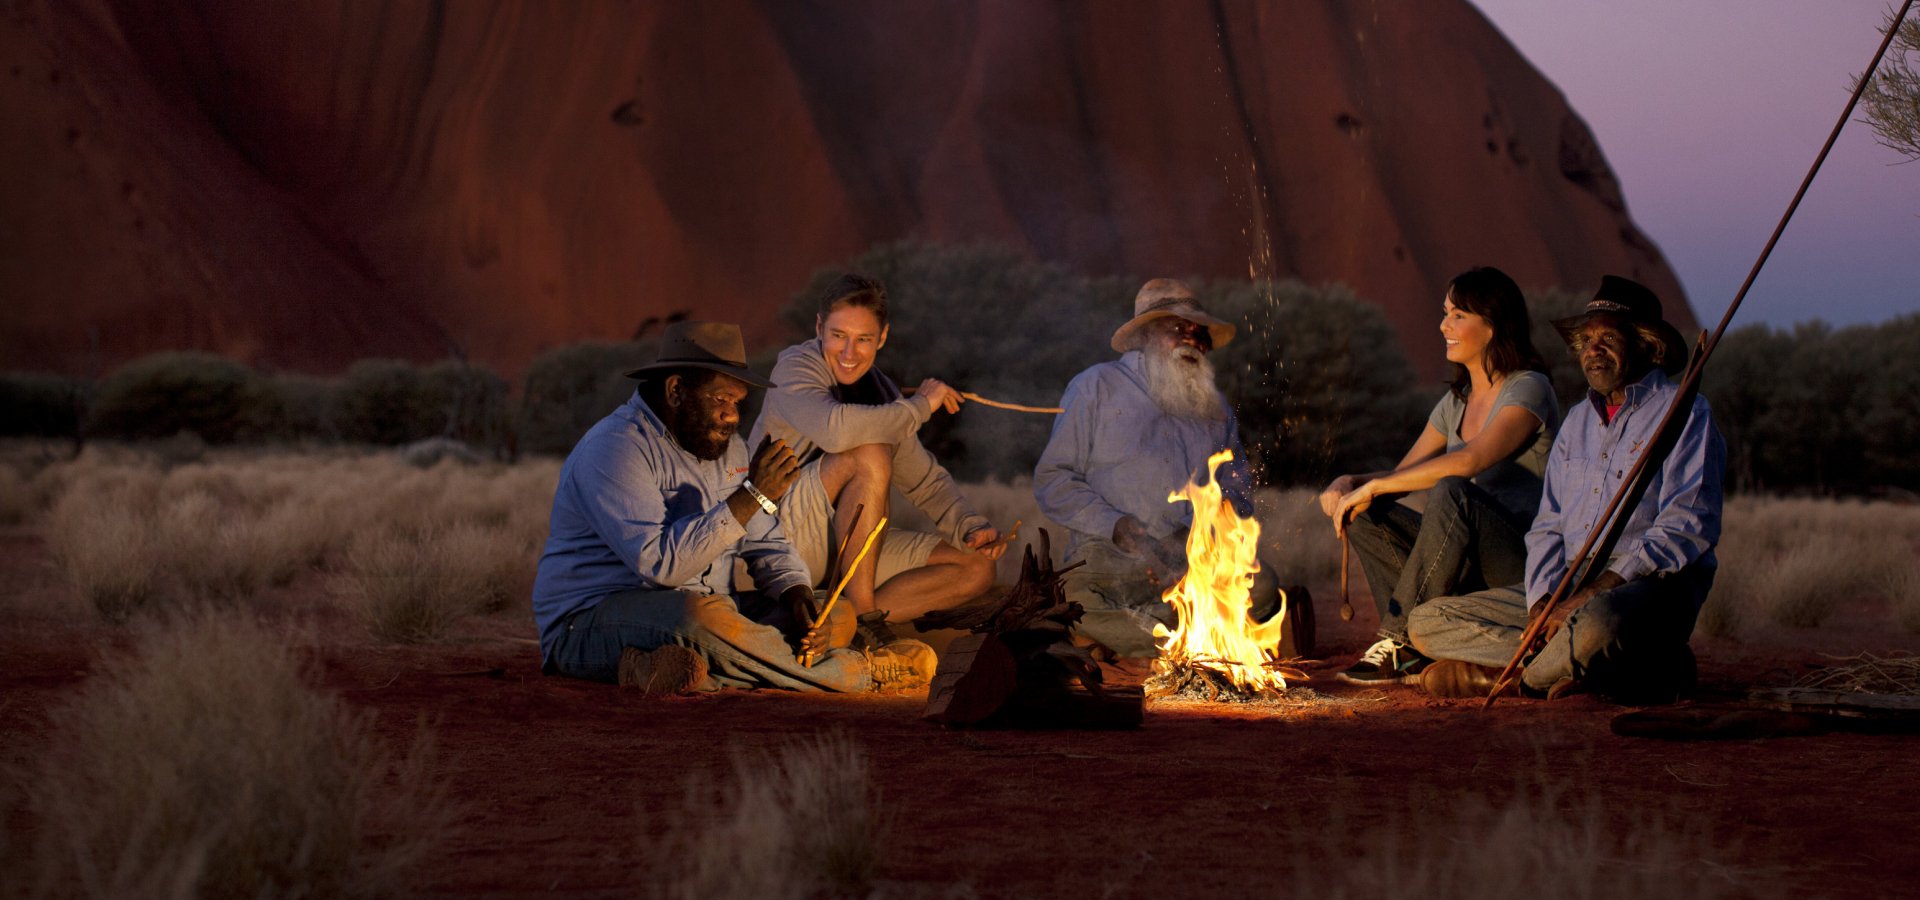 Sitting around a campfire at night | Voyages Indigenous Tourism